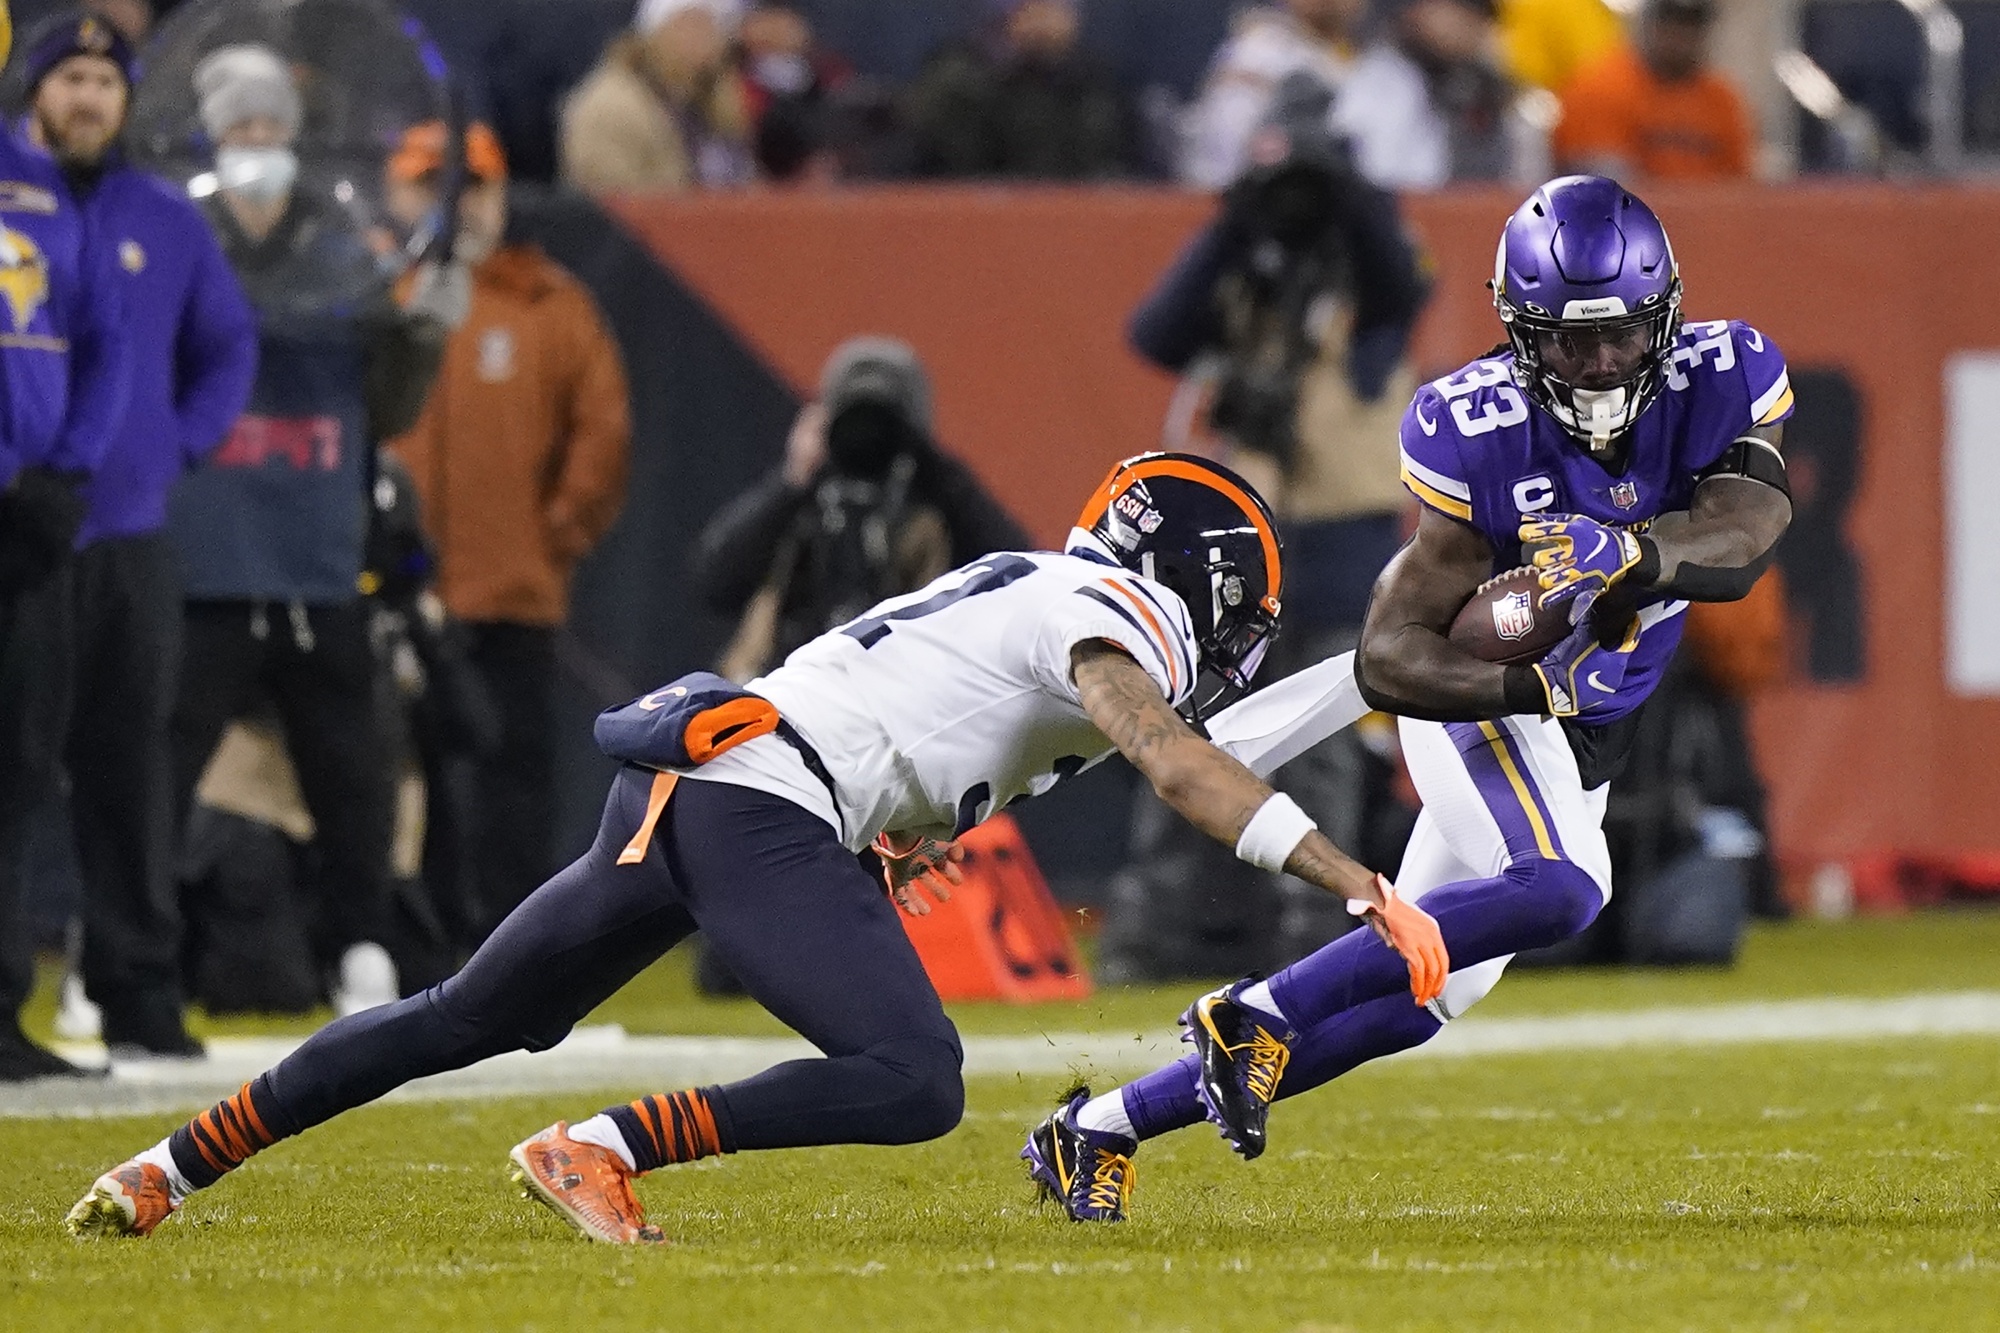 Cousins Throws for 2 Touchdowns as Vikings Beat Bears 17-9 - Bloomberg